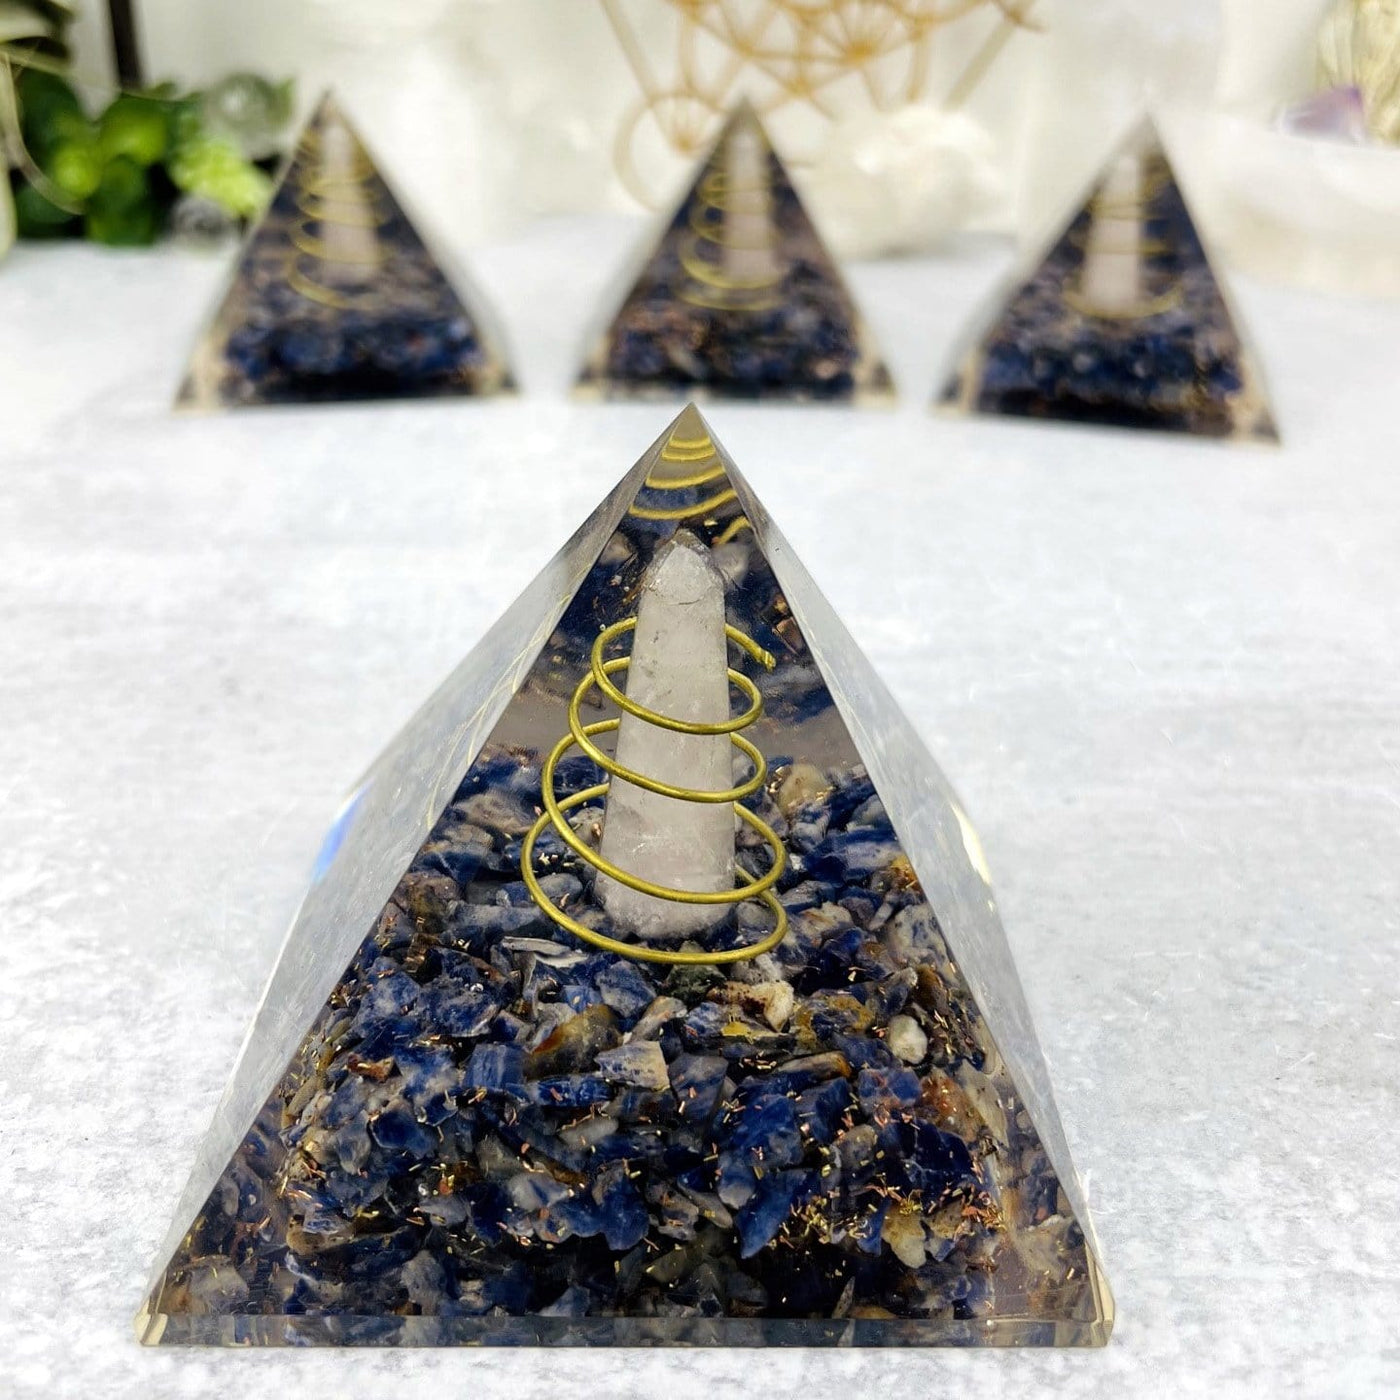 up close photo of the sodalite pyramid to view rose quartz point with wire coil wrapped around sodalite chips metal shavings 